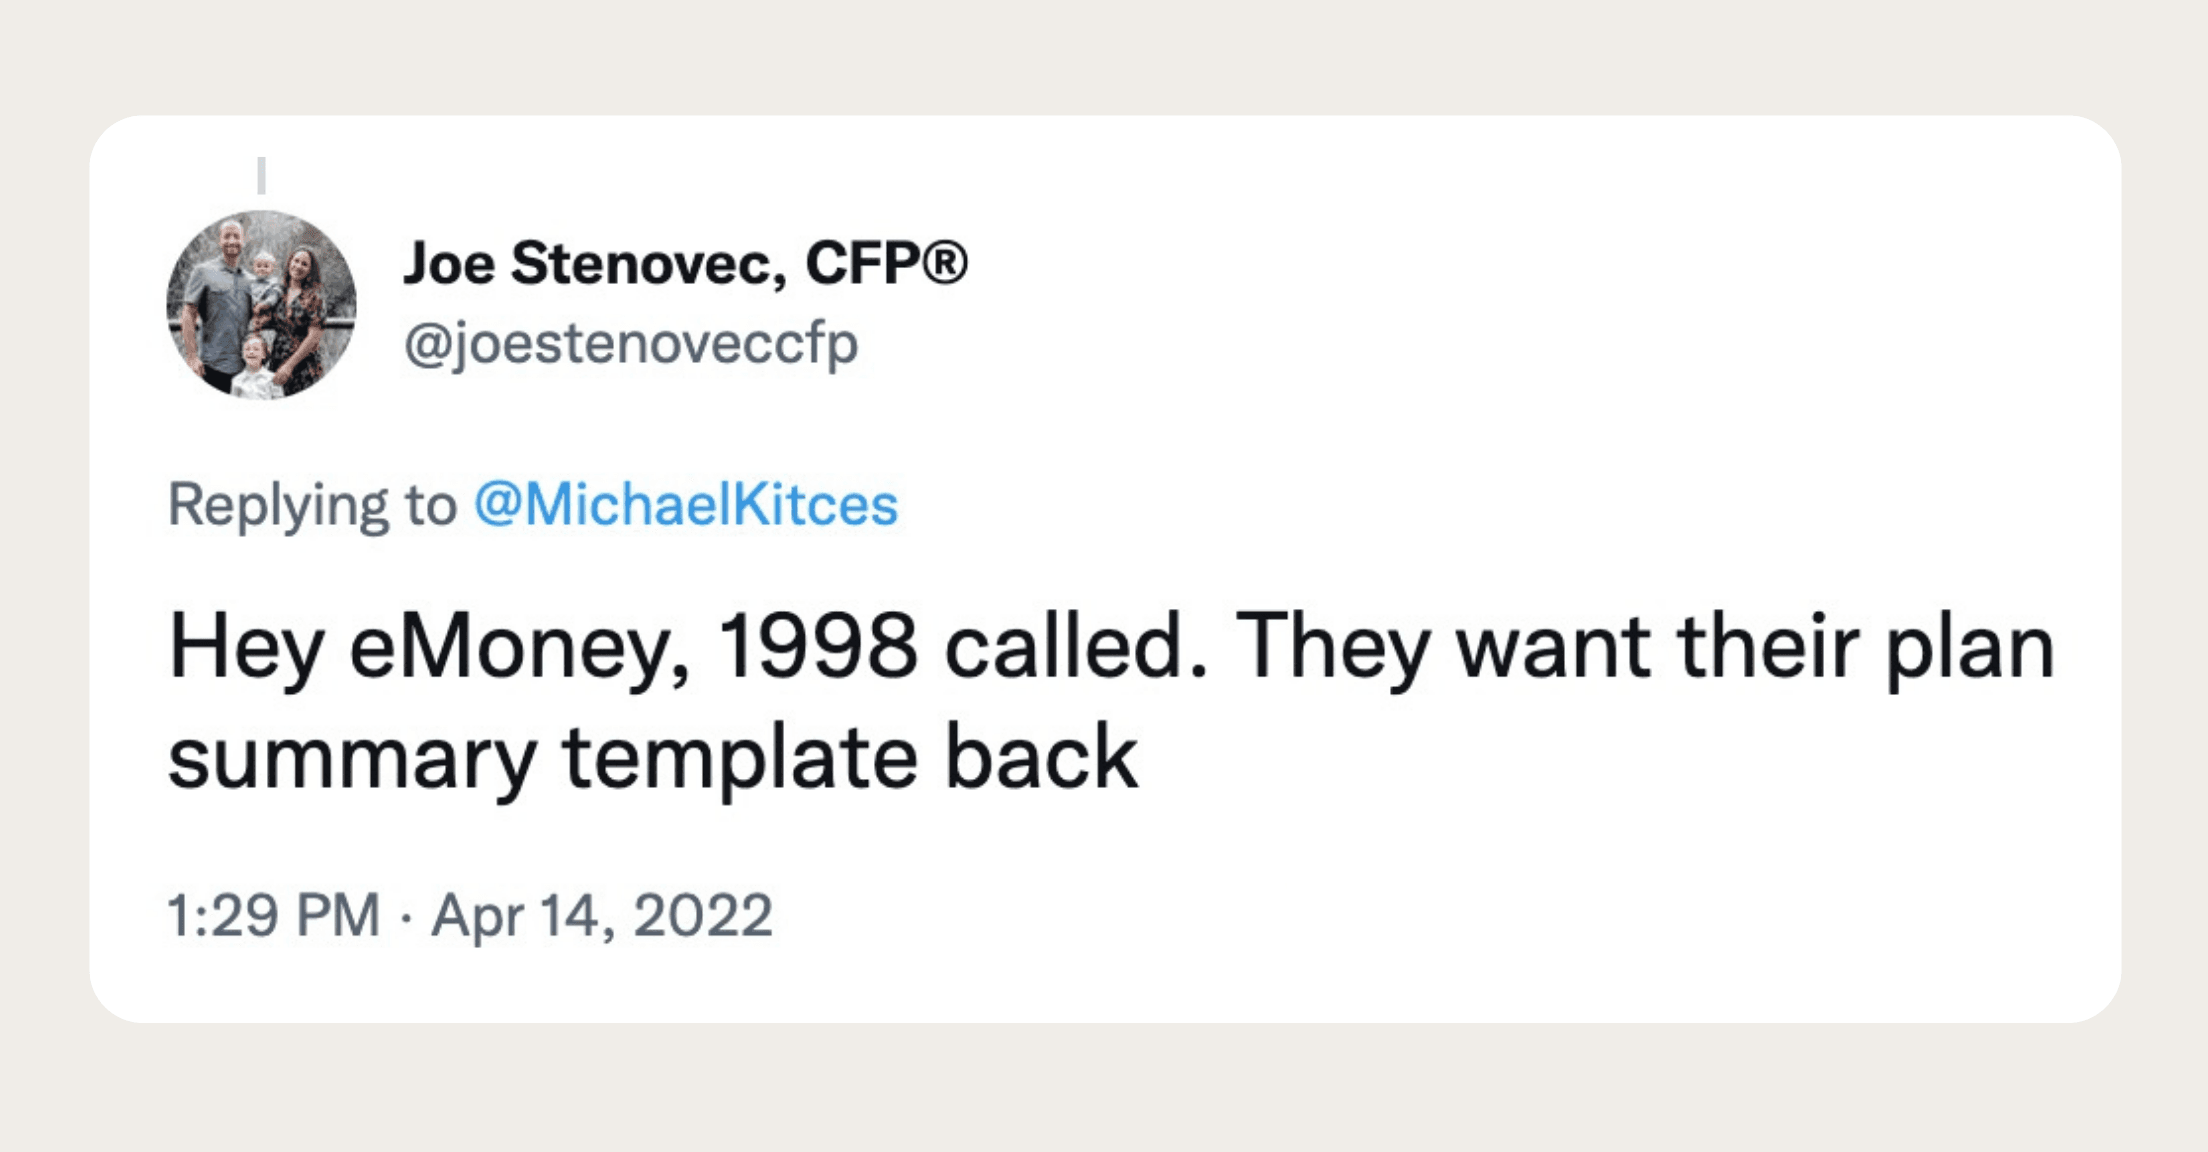 Tweet saying, "Hey eMoney, 1998 called. They want their plan summary template back."